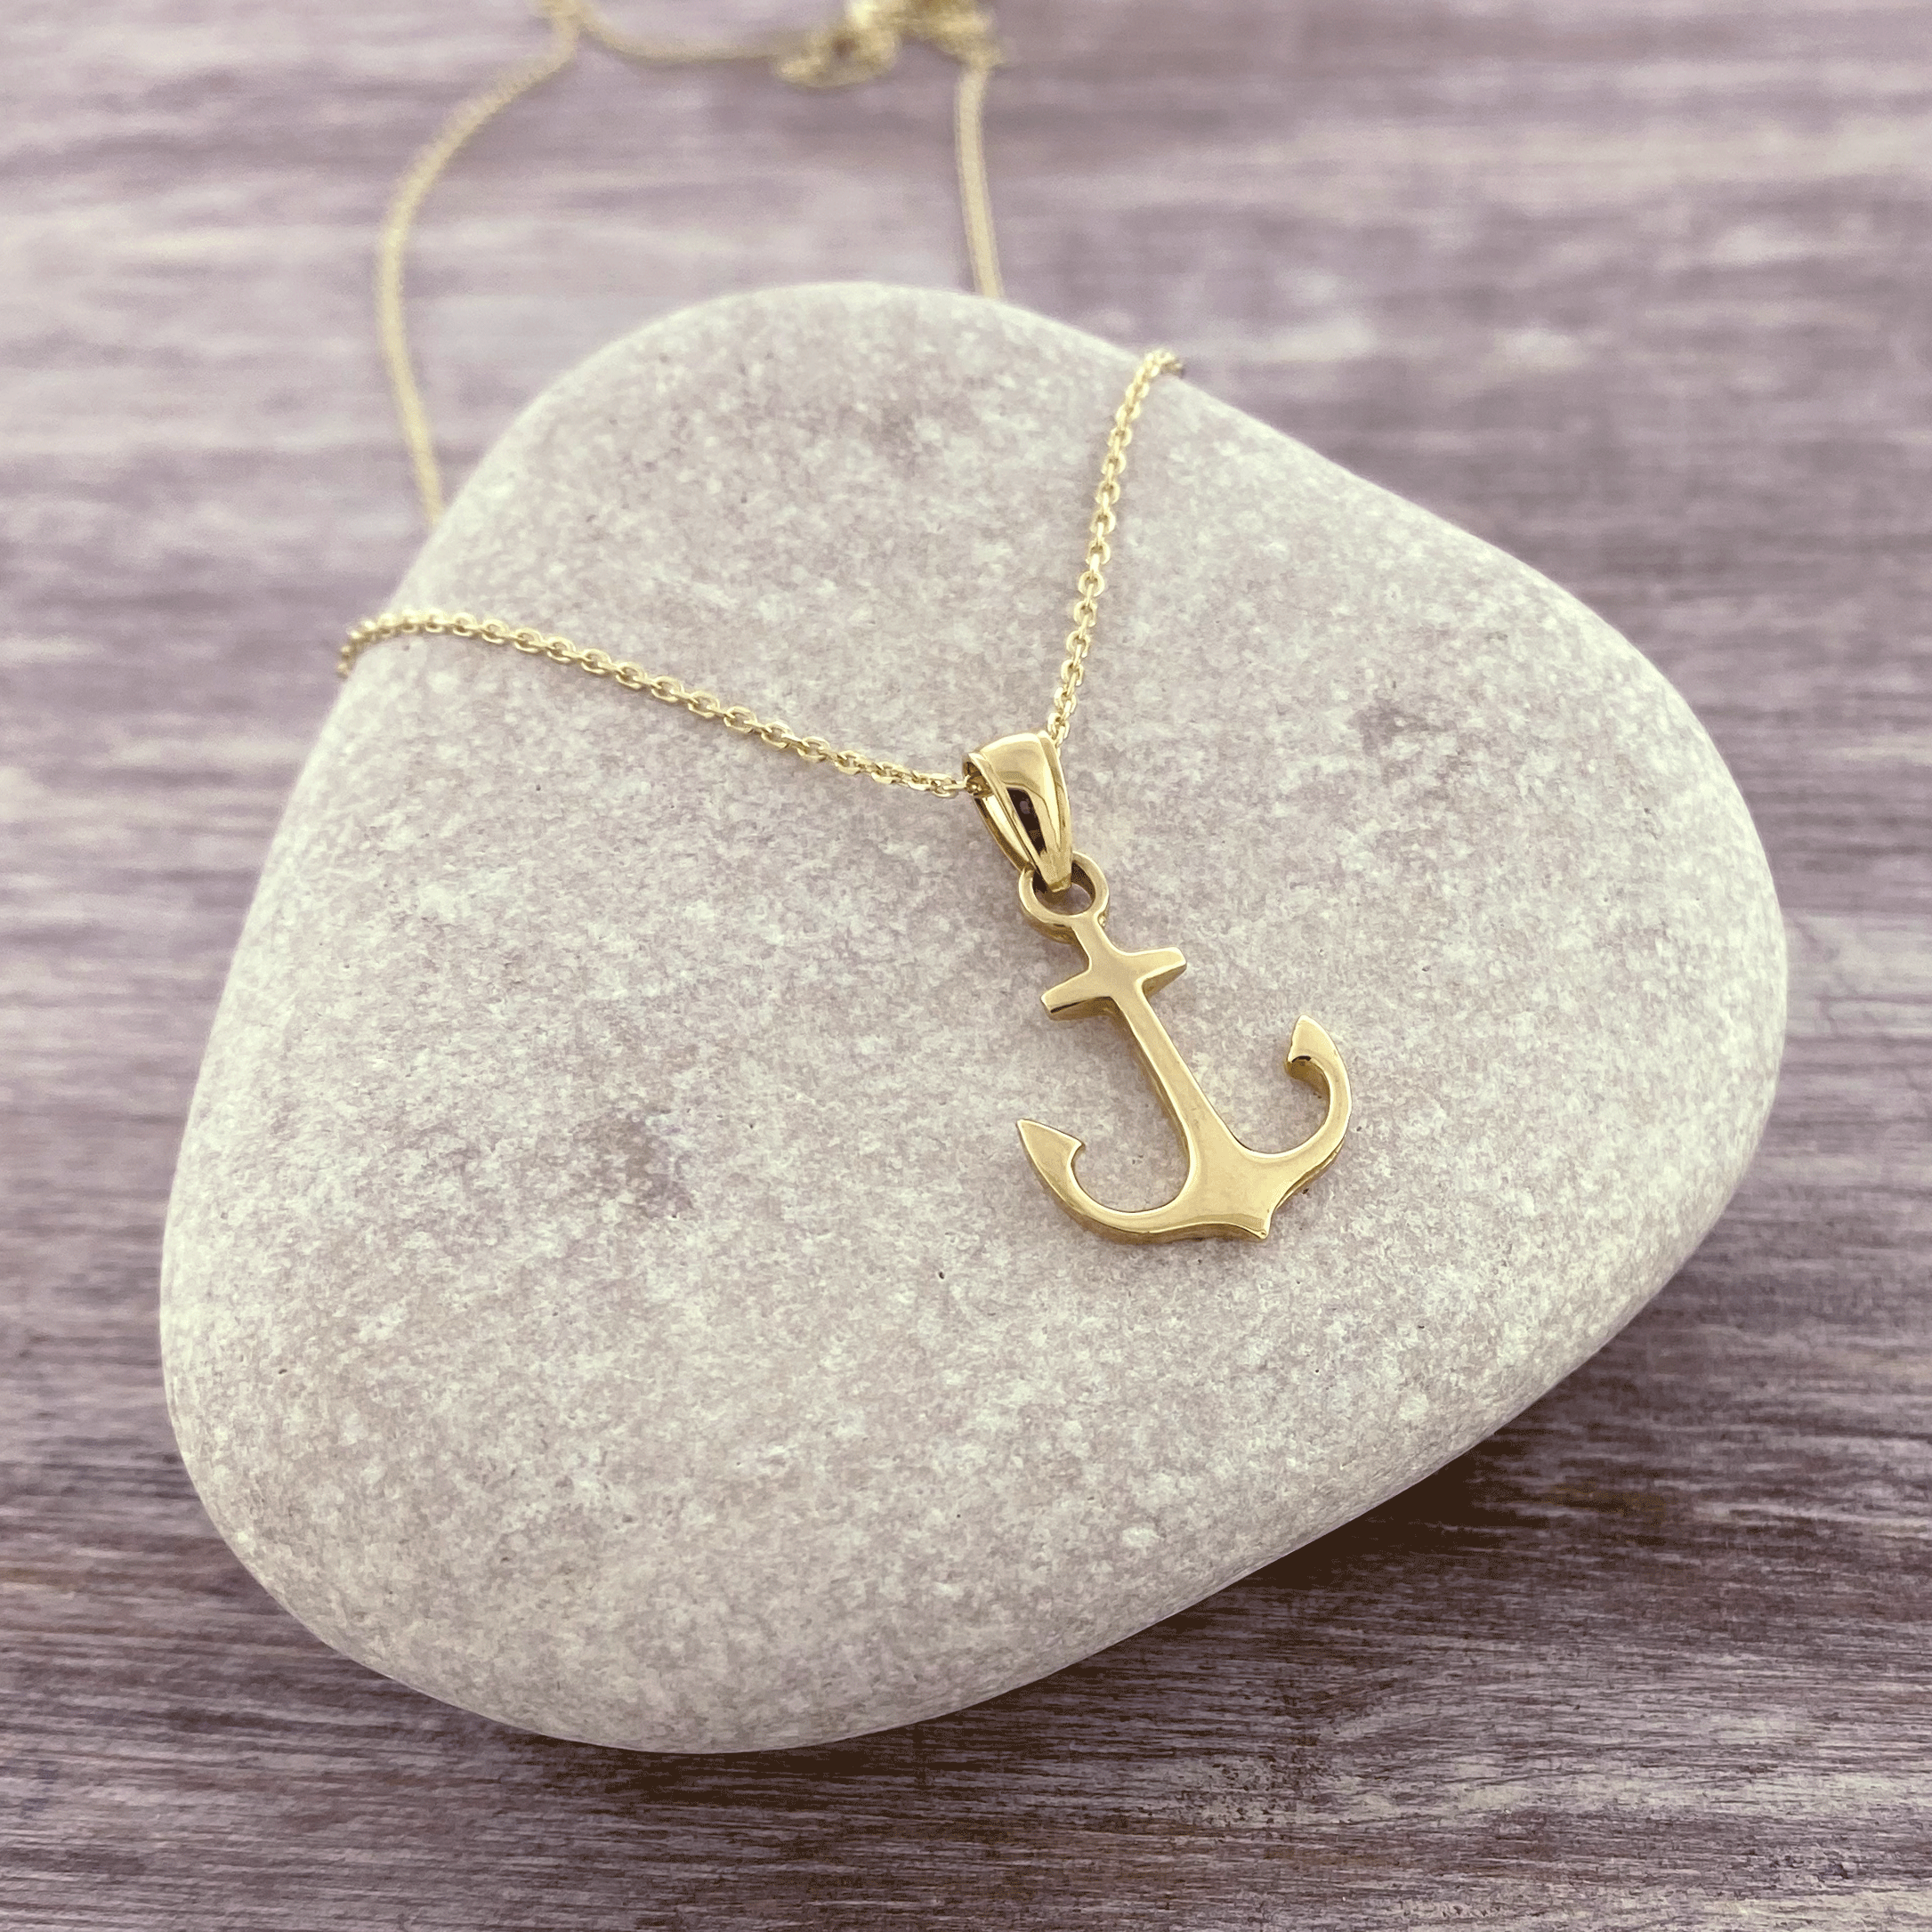 Anchor necklace, gold anchor necklace with a black wax cord, gold pendant.  gift for her, gold necklace, nautical jewelry, anchor charm – Shani & Adi  Jewelry